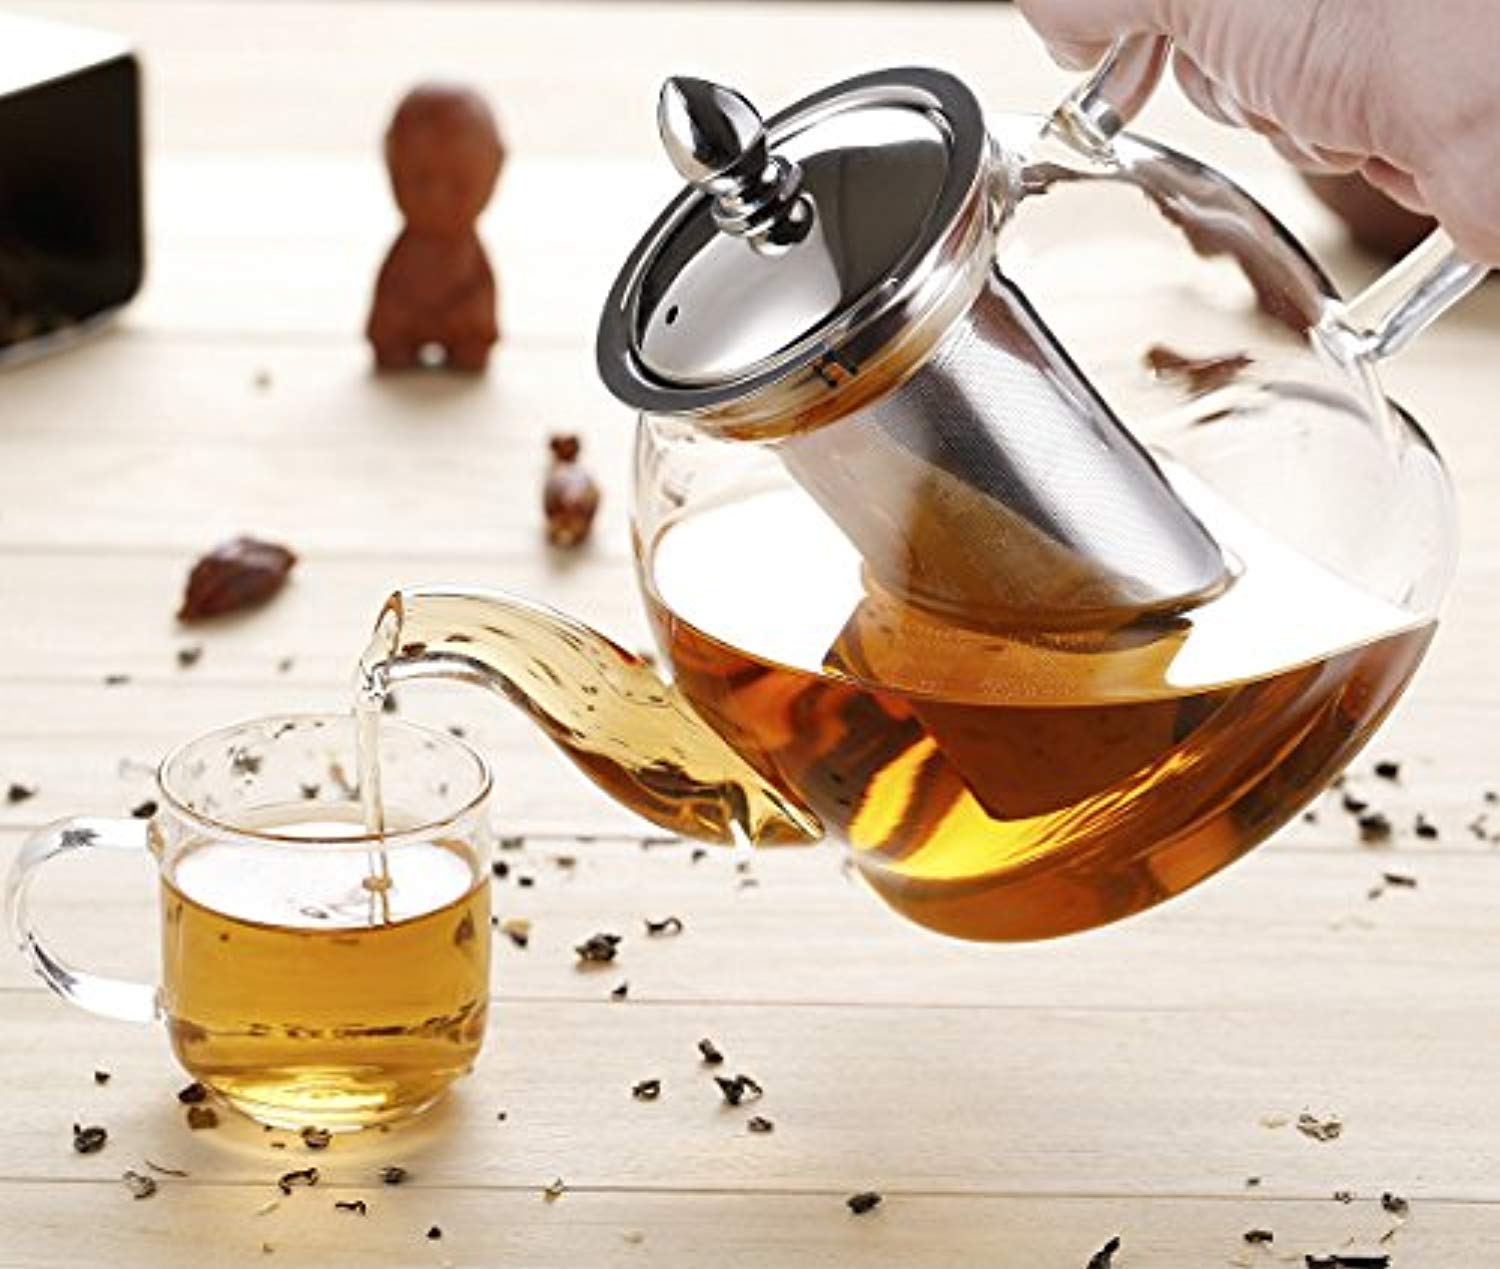 Hiware 1000ml Glass Teapot with Removable Infuser, Stovetop Safe